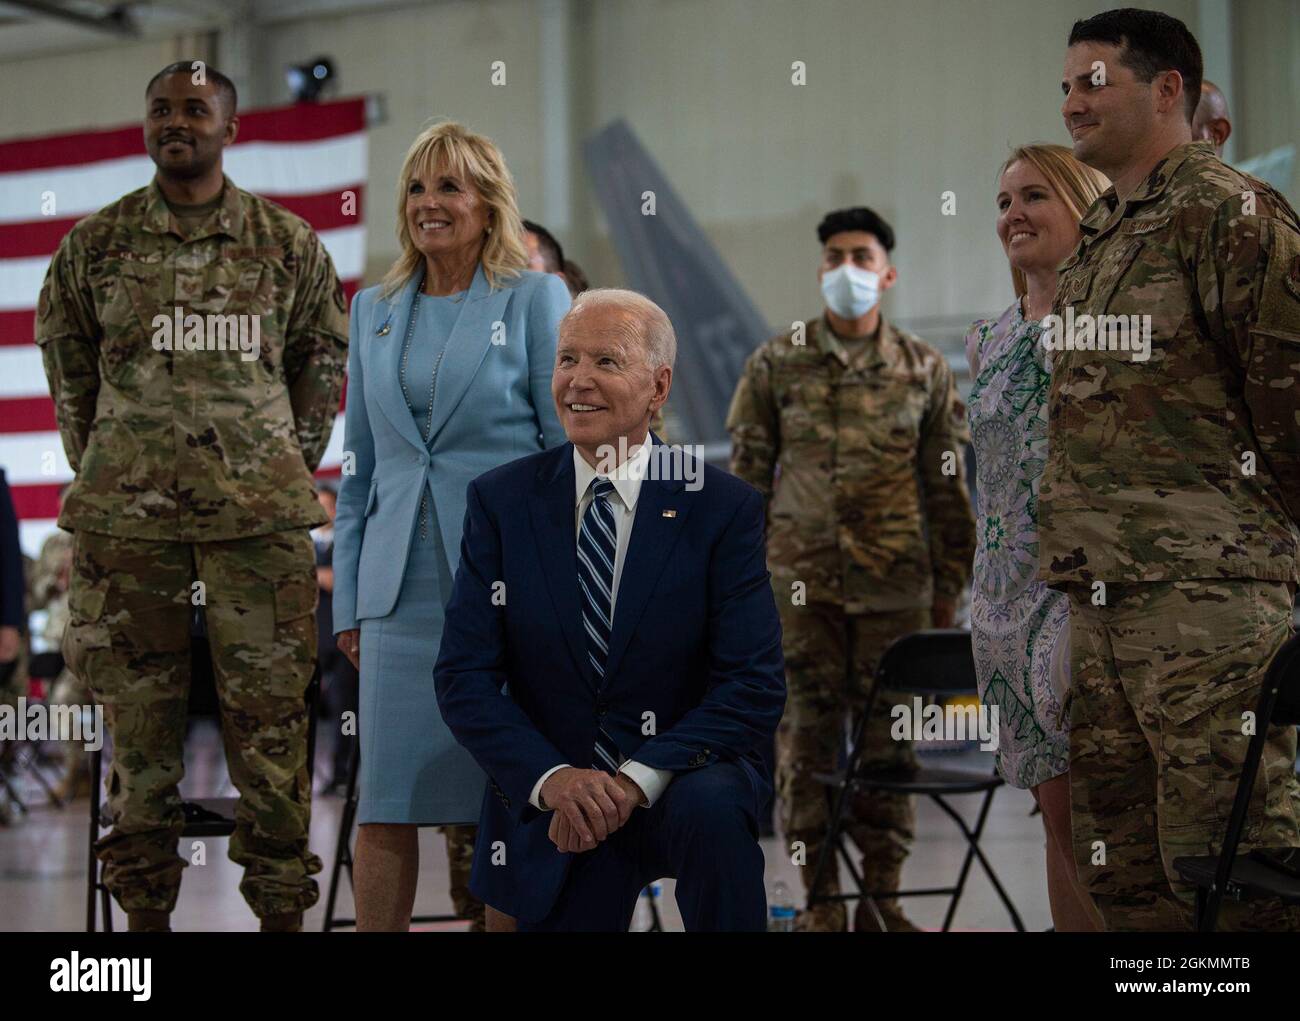 President Joe Biden and first lady Jill Biden interact with service members at Joint Base Langley-Eustis, Virginia, May 28, 2021. Biden spoke on the importance of military sacrifice and thanked the members for their continued dedication to defending the nation. Stock Photo